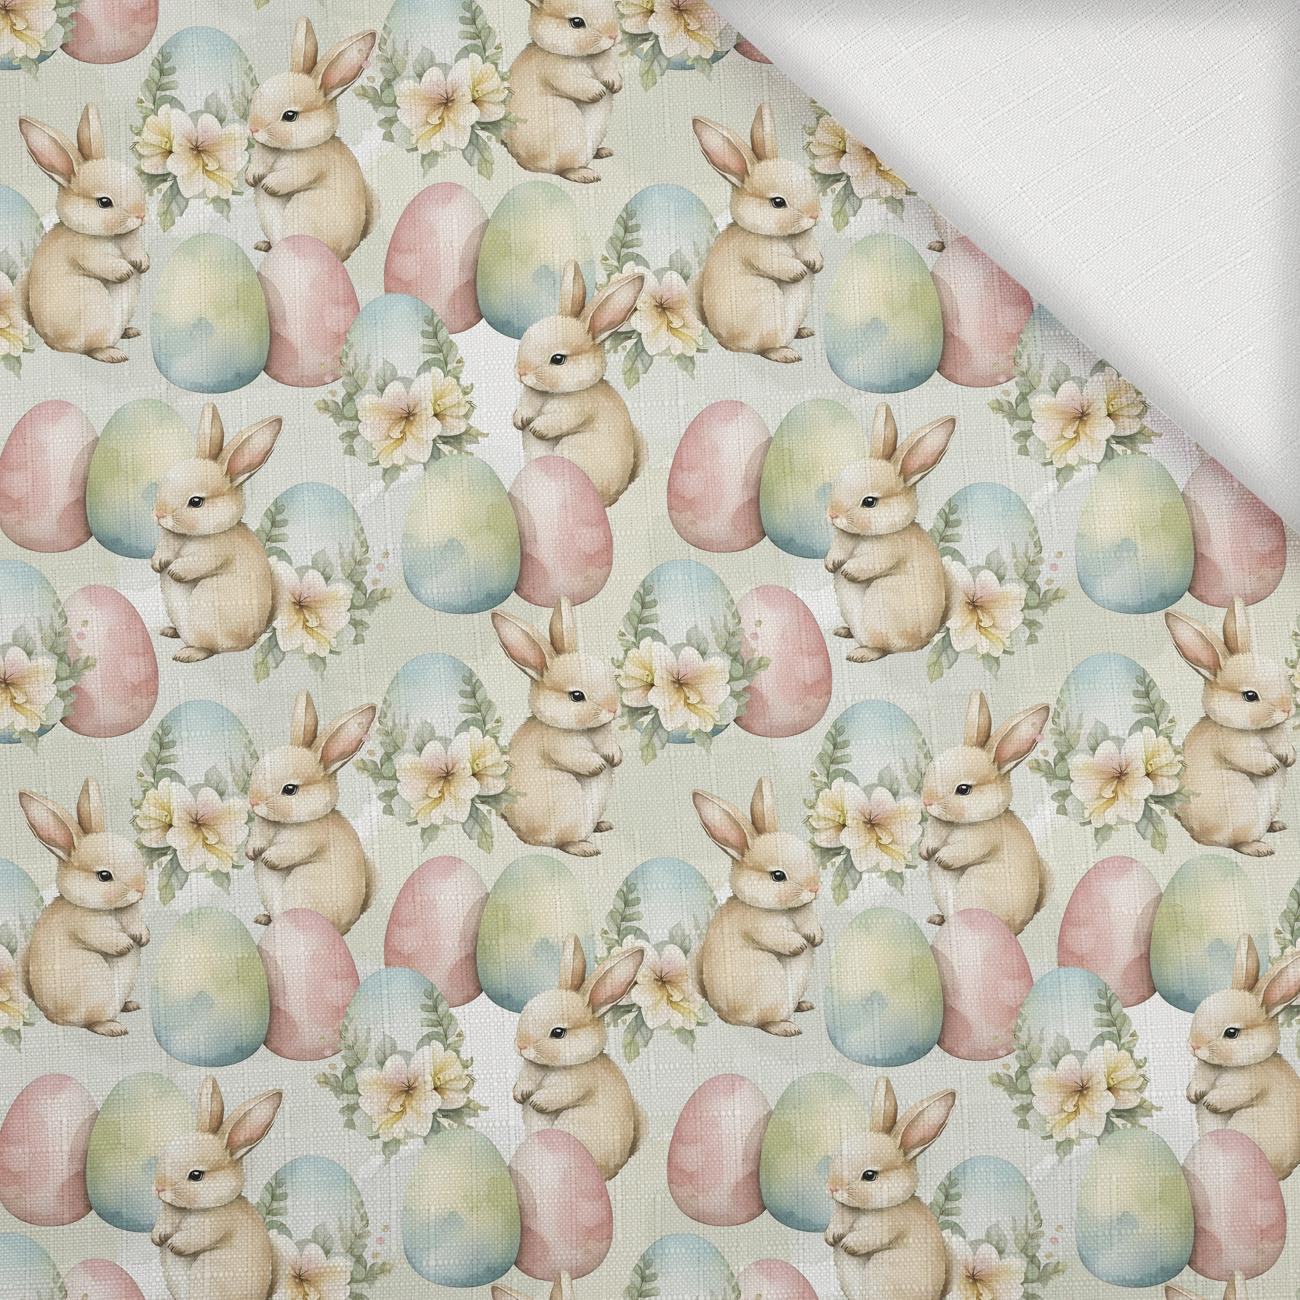 BUNNY EASTER PAT. 2 - Woven Fabric for tablecloths